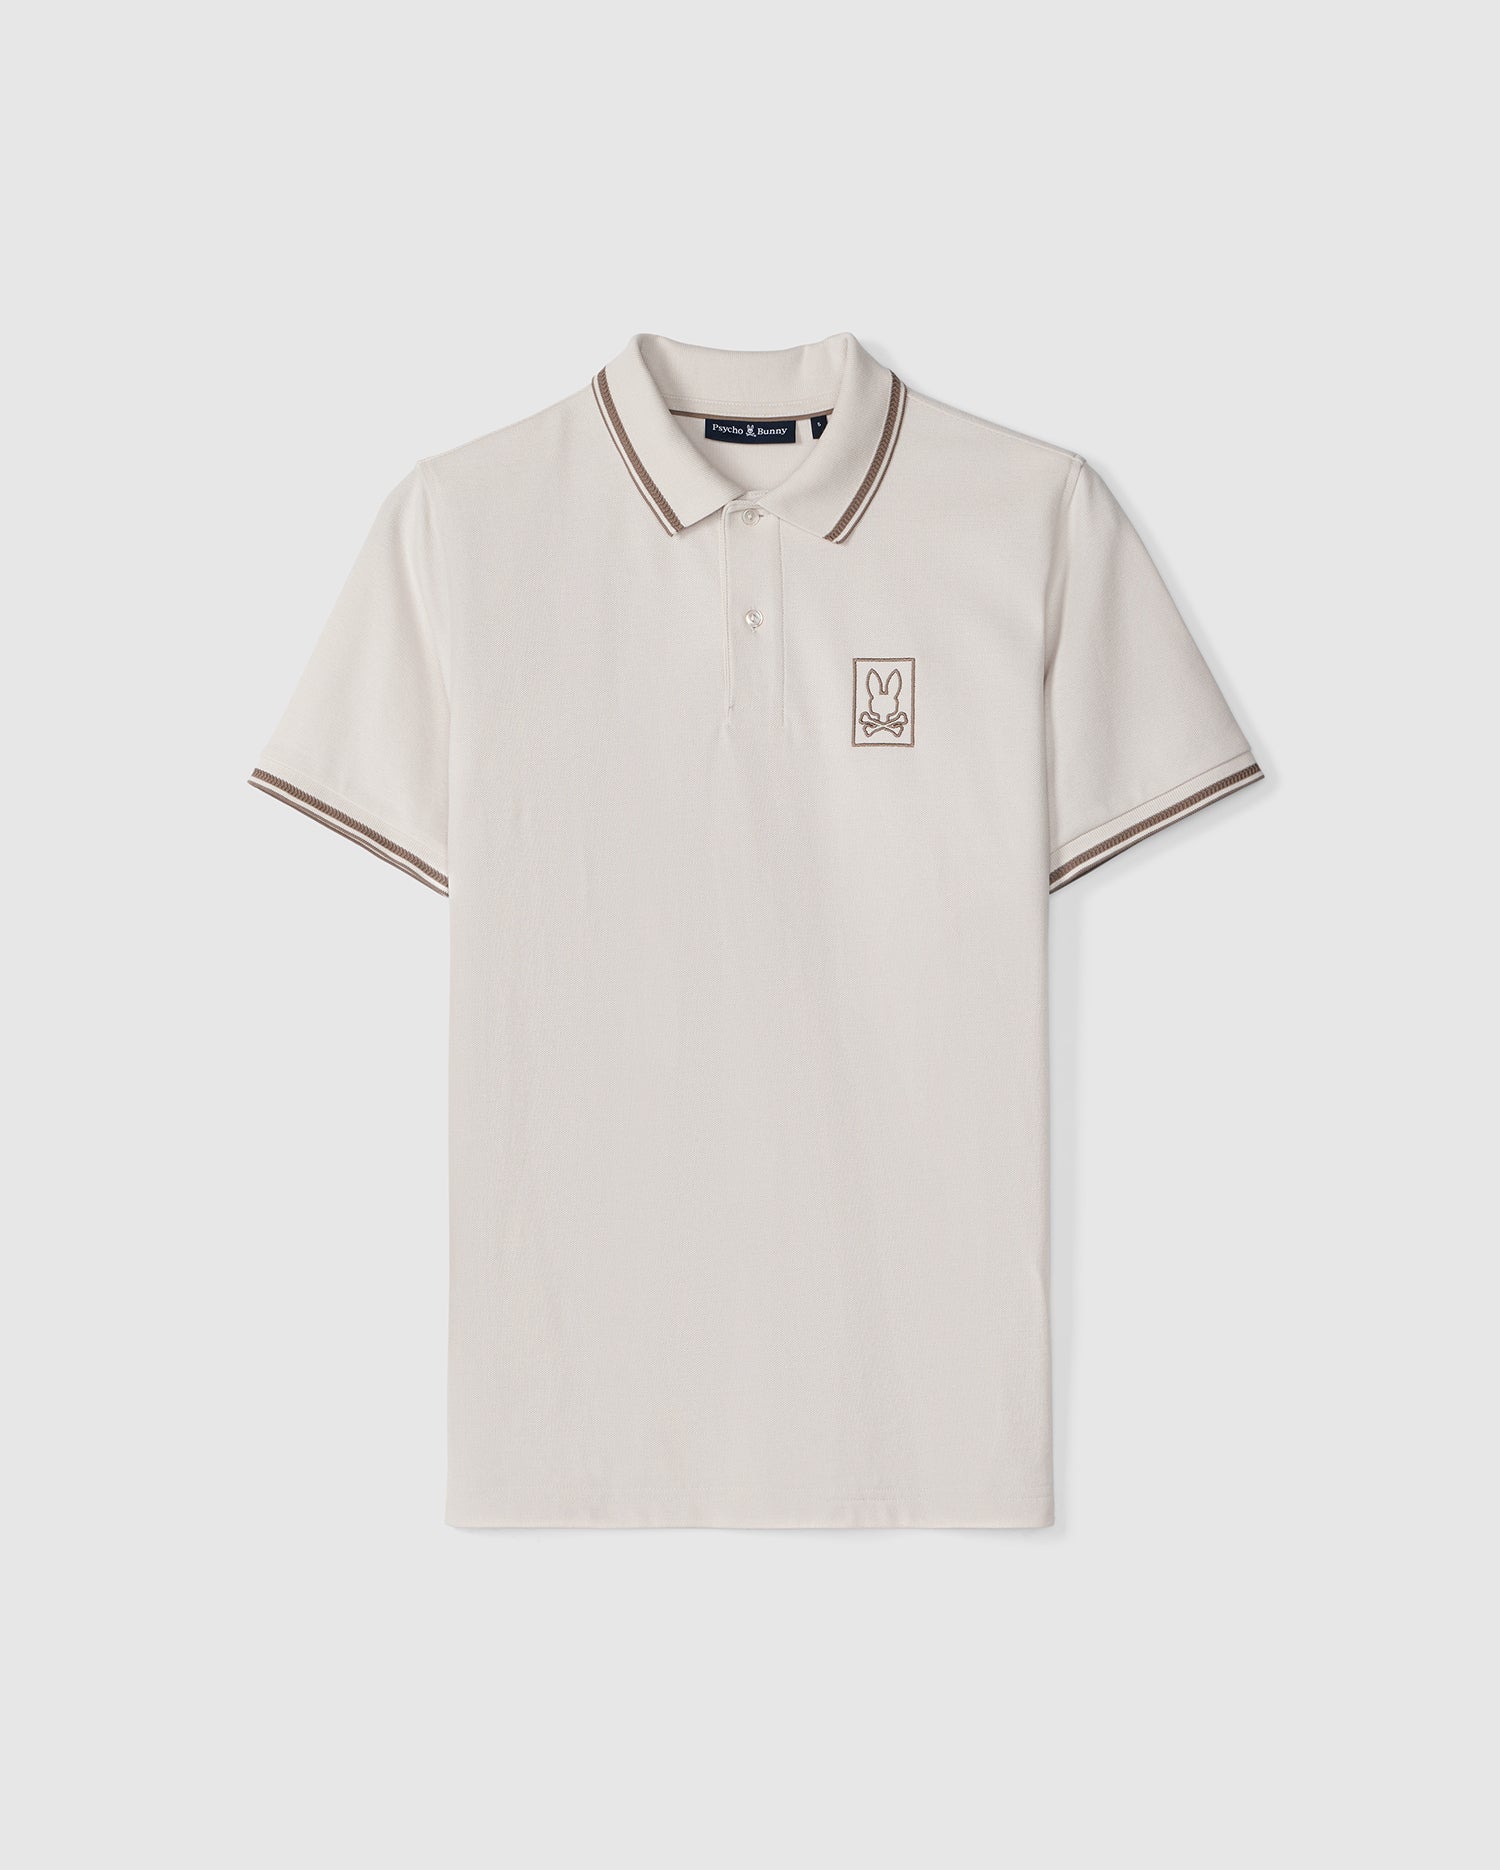 An Psycho Bunny polo shirt crafted from cream-colored Peruvian Pima cotton with brown trim on the crease-resistant collar and sleeves, featuring a small embroidered bunny logo on the left chest, displayed against a.